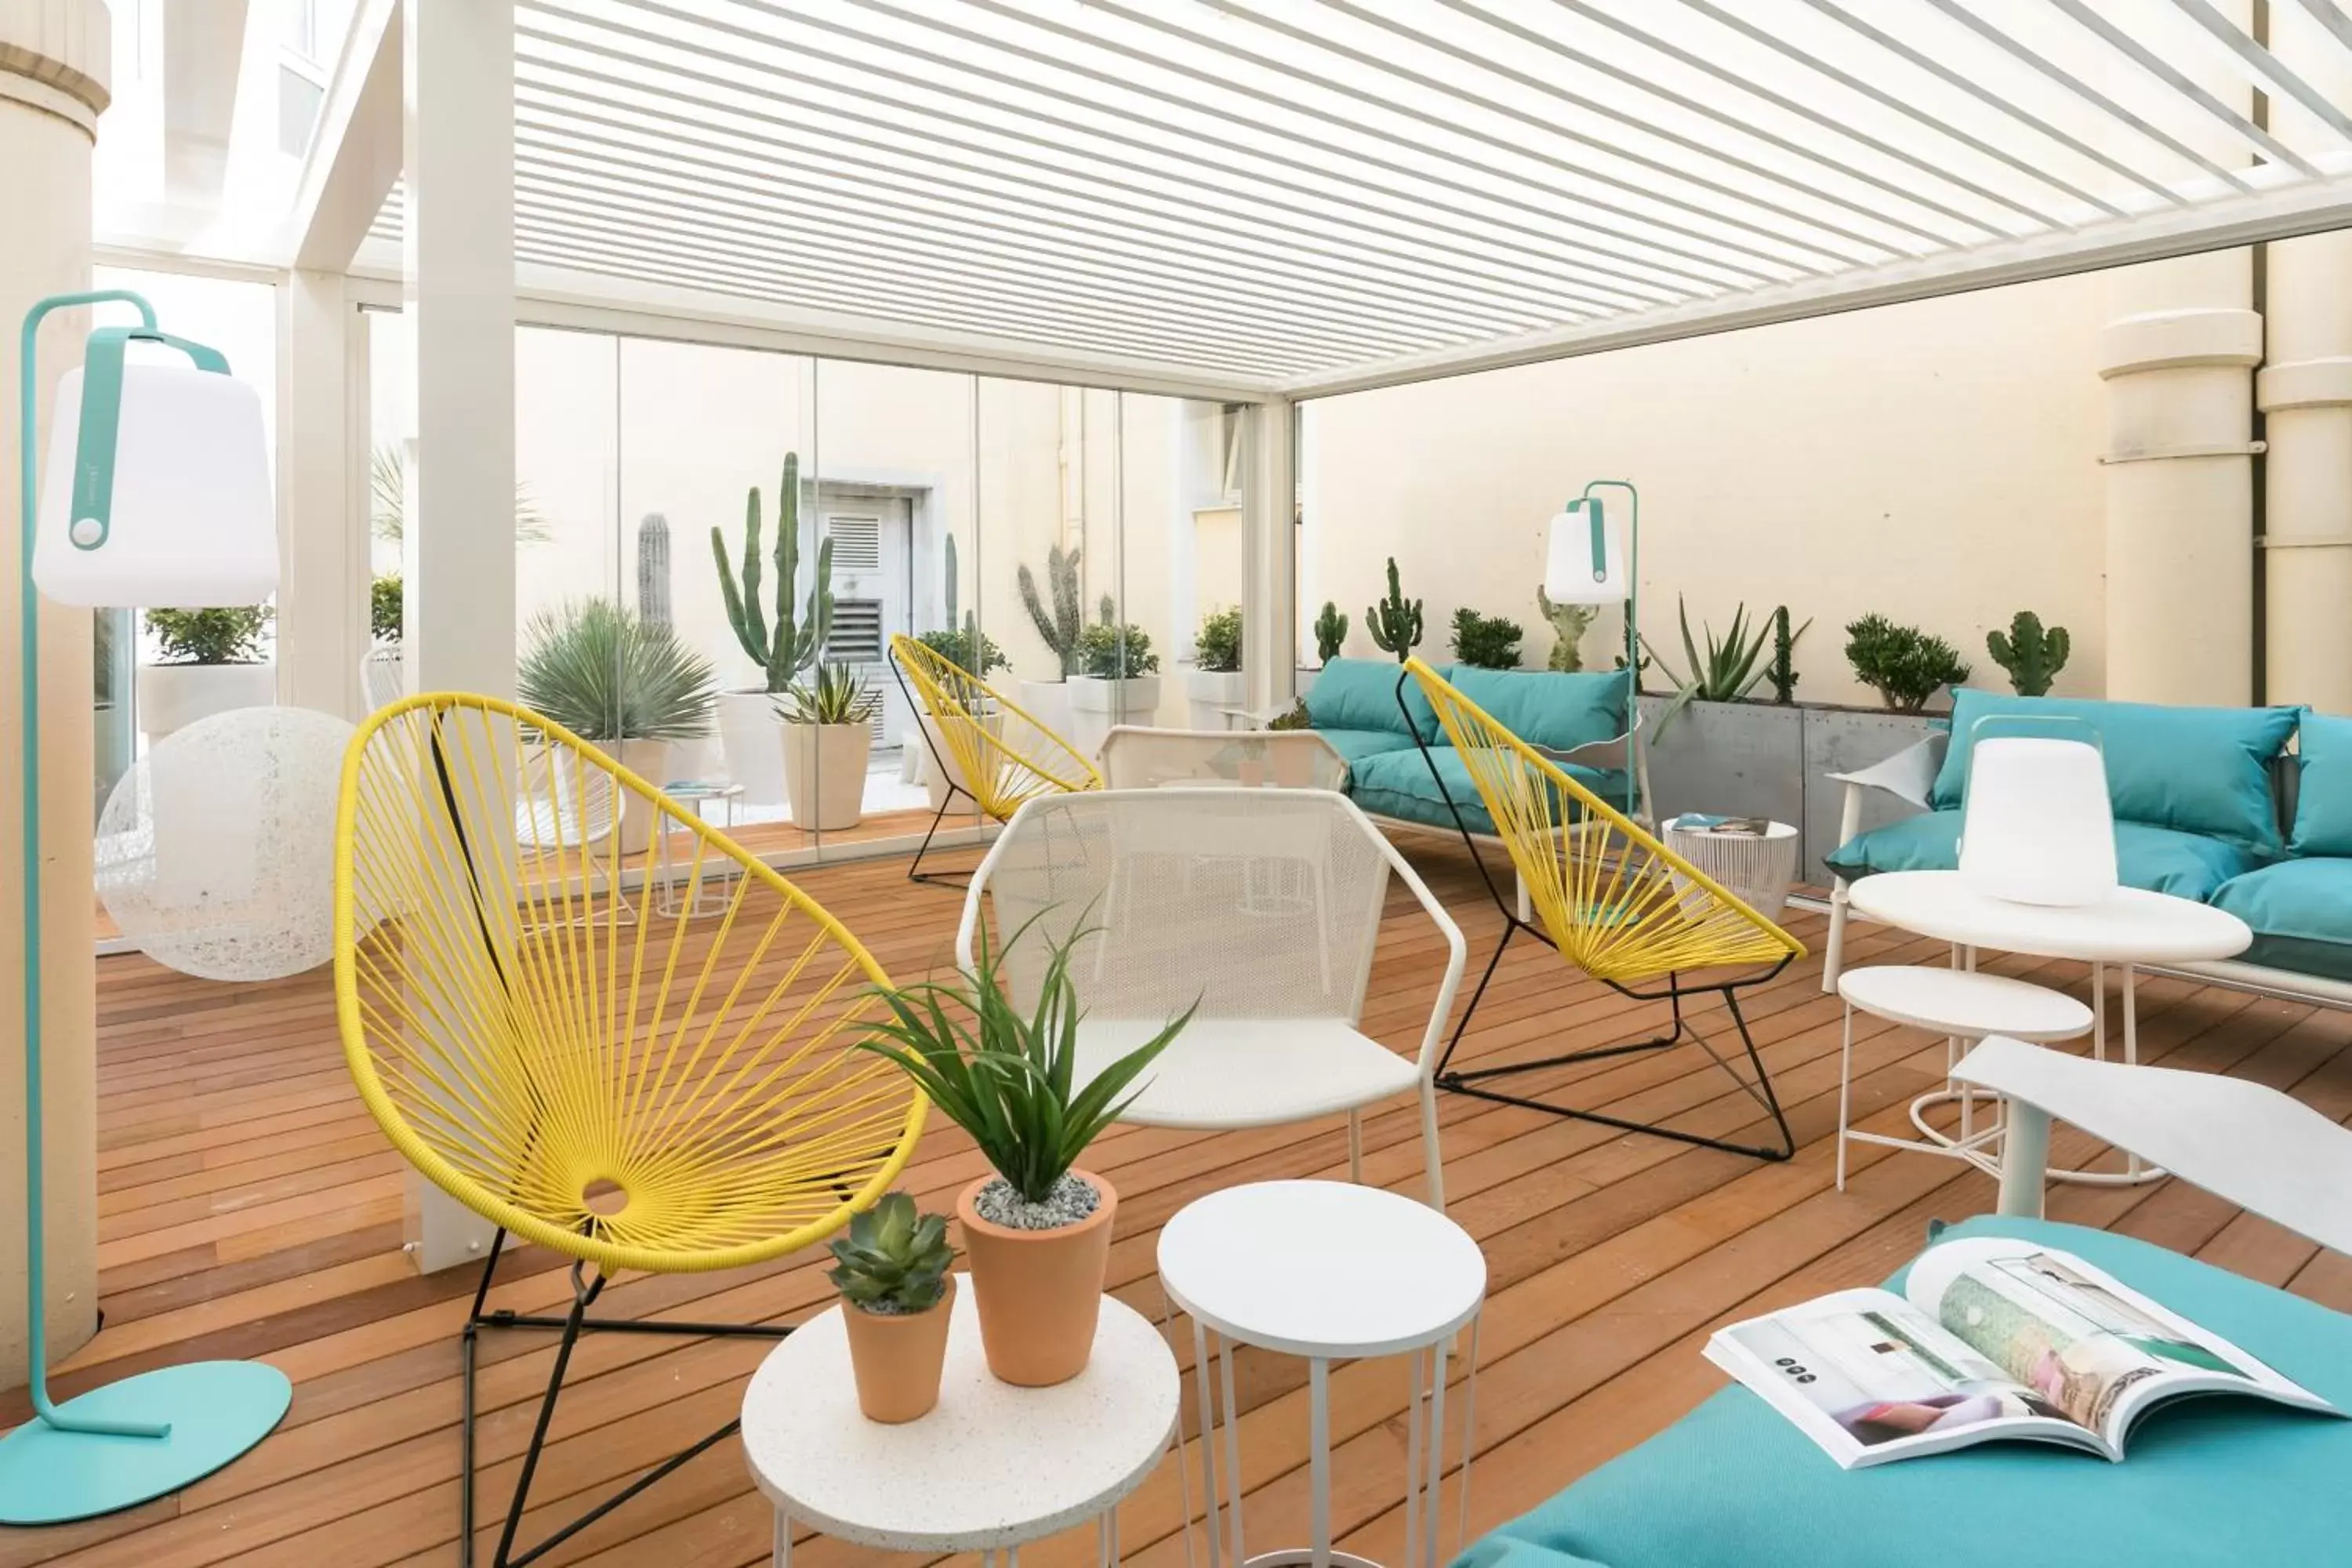 Patio in The Deck Hotel by Happyculture